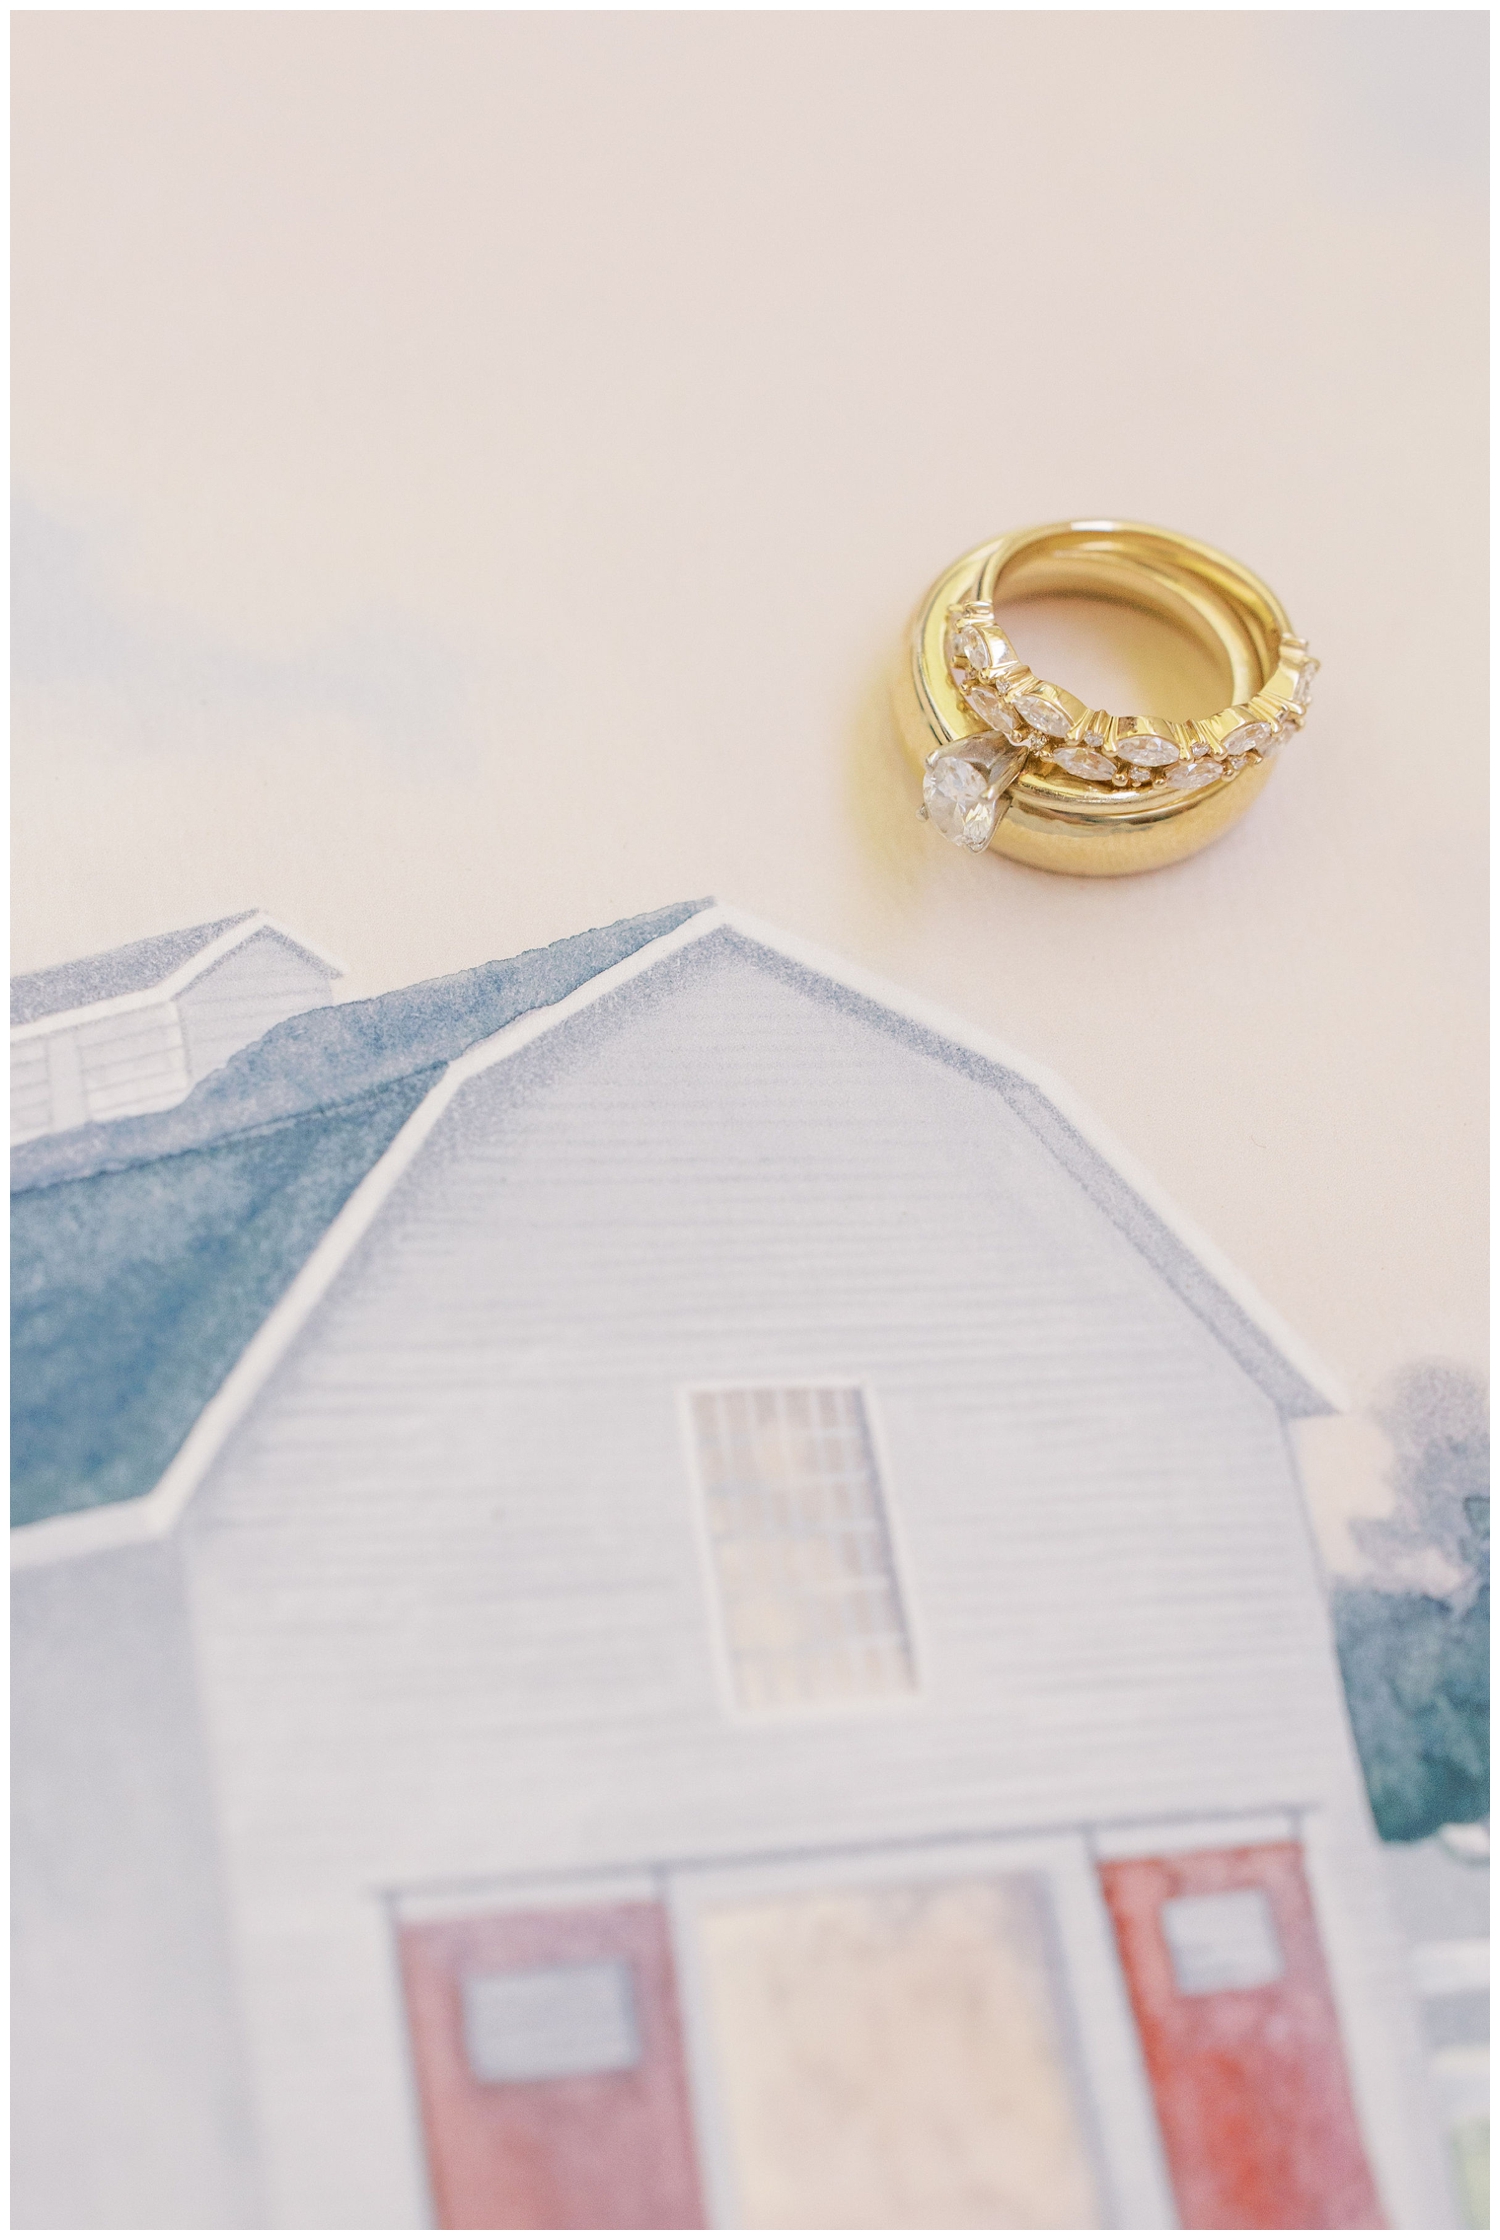 Houston white barn wedding with gold rings at The Grand Texana